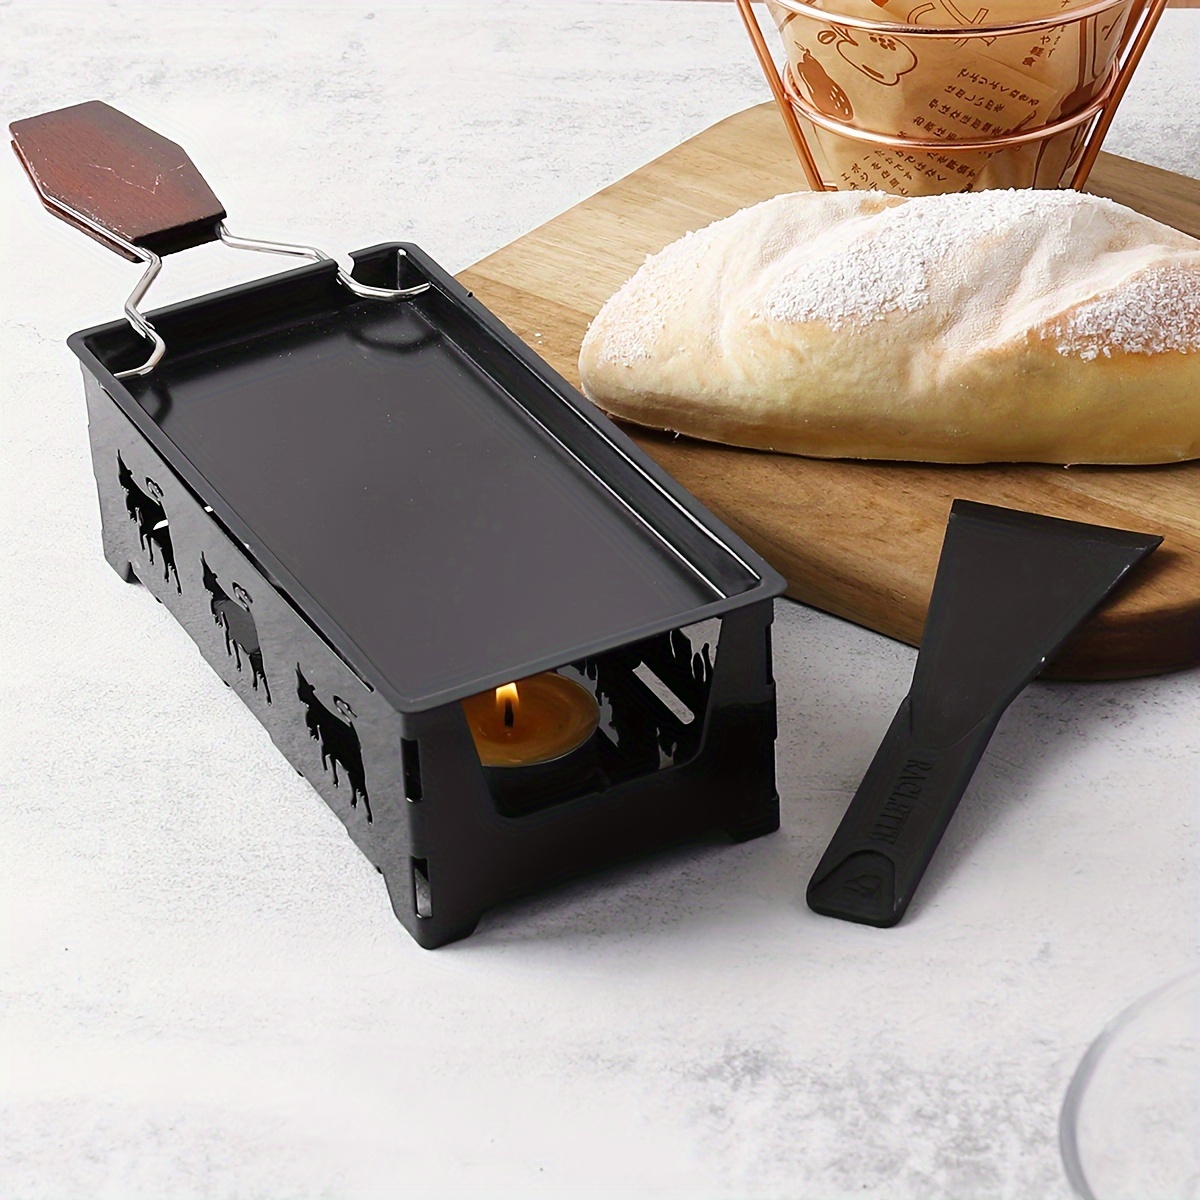 Heatproof Stainless Steel Raclette Pan Non Slip Cheese Oven For Kitchen  Cooking Dinner - AliExpress